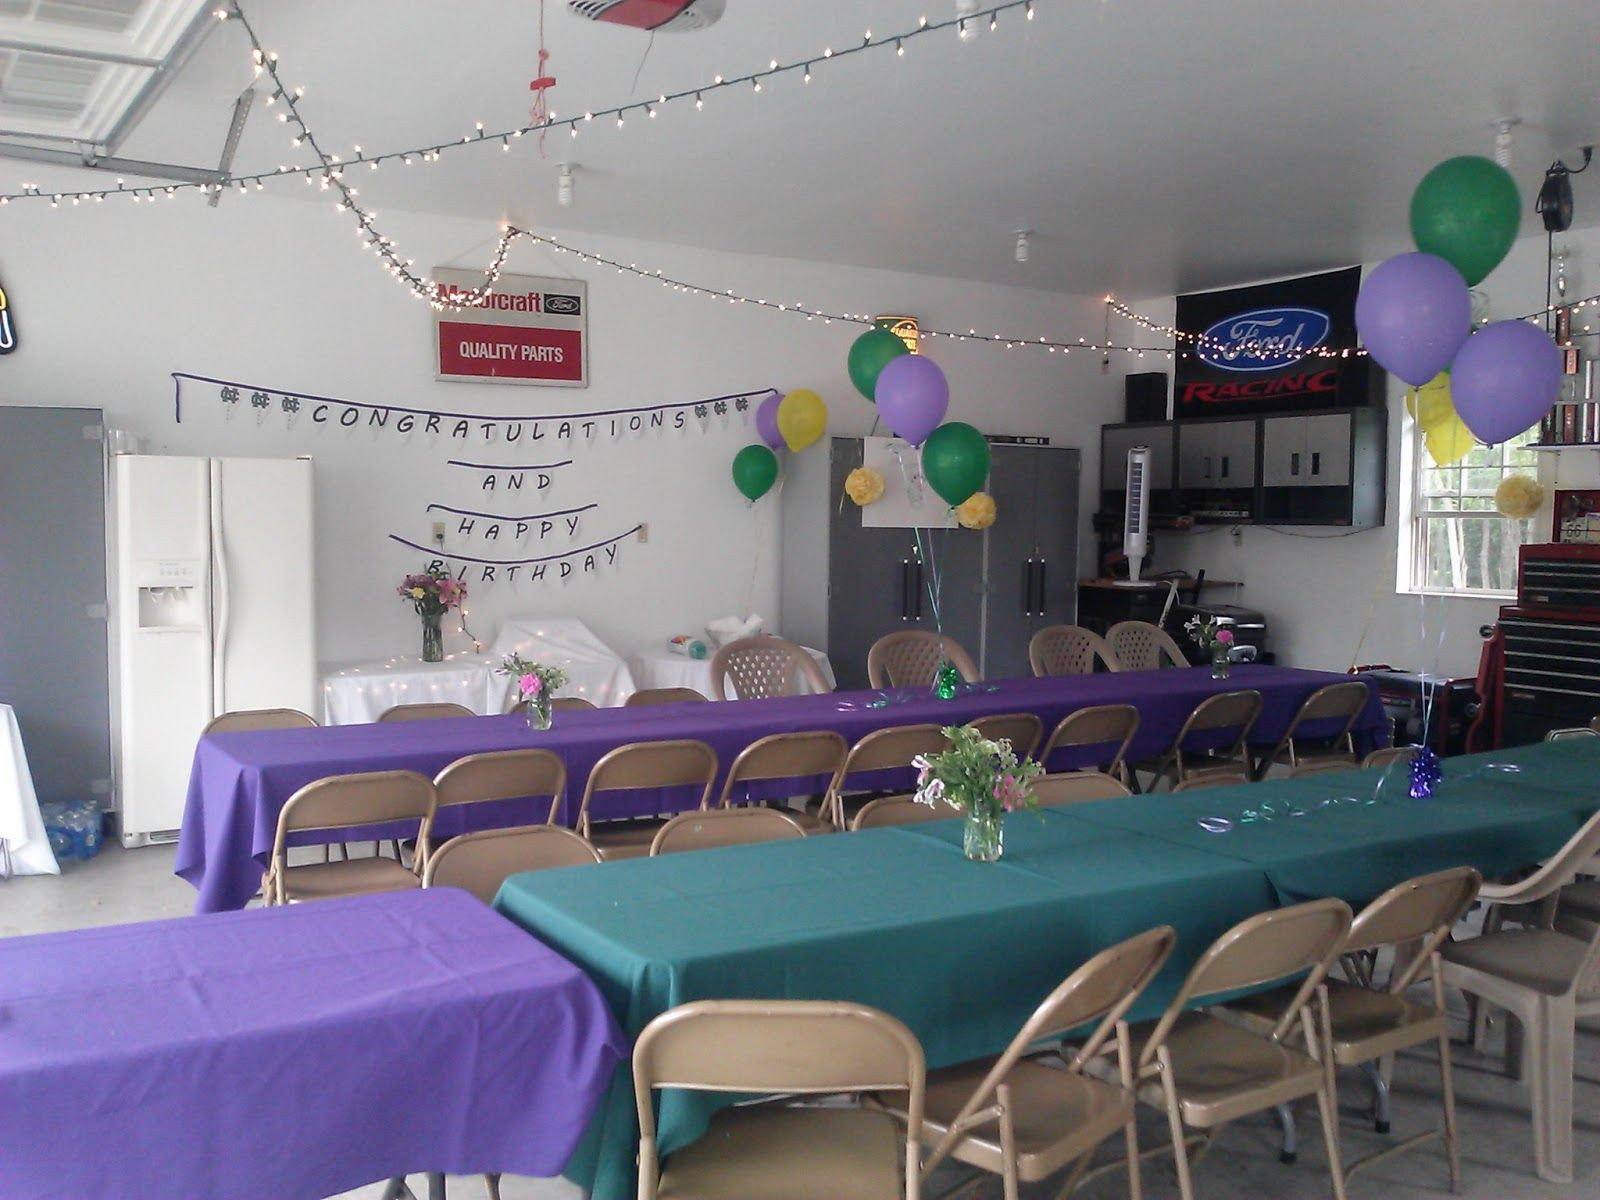 How To Decorate For A Birthday Party
 graduation party in garage ideas Google Search